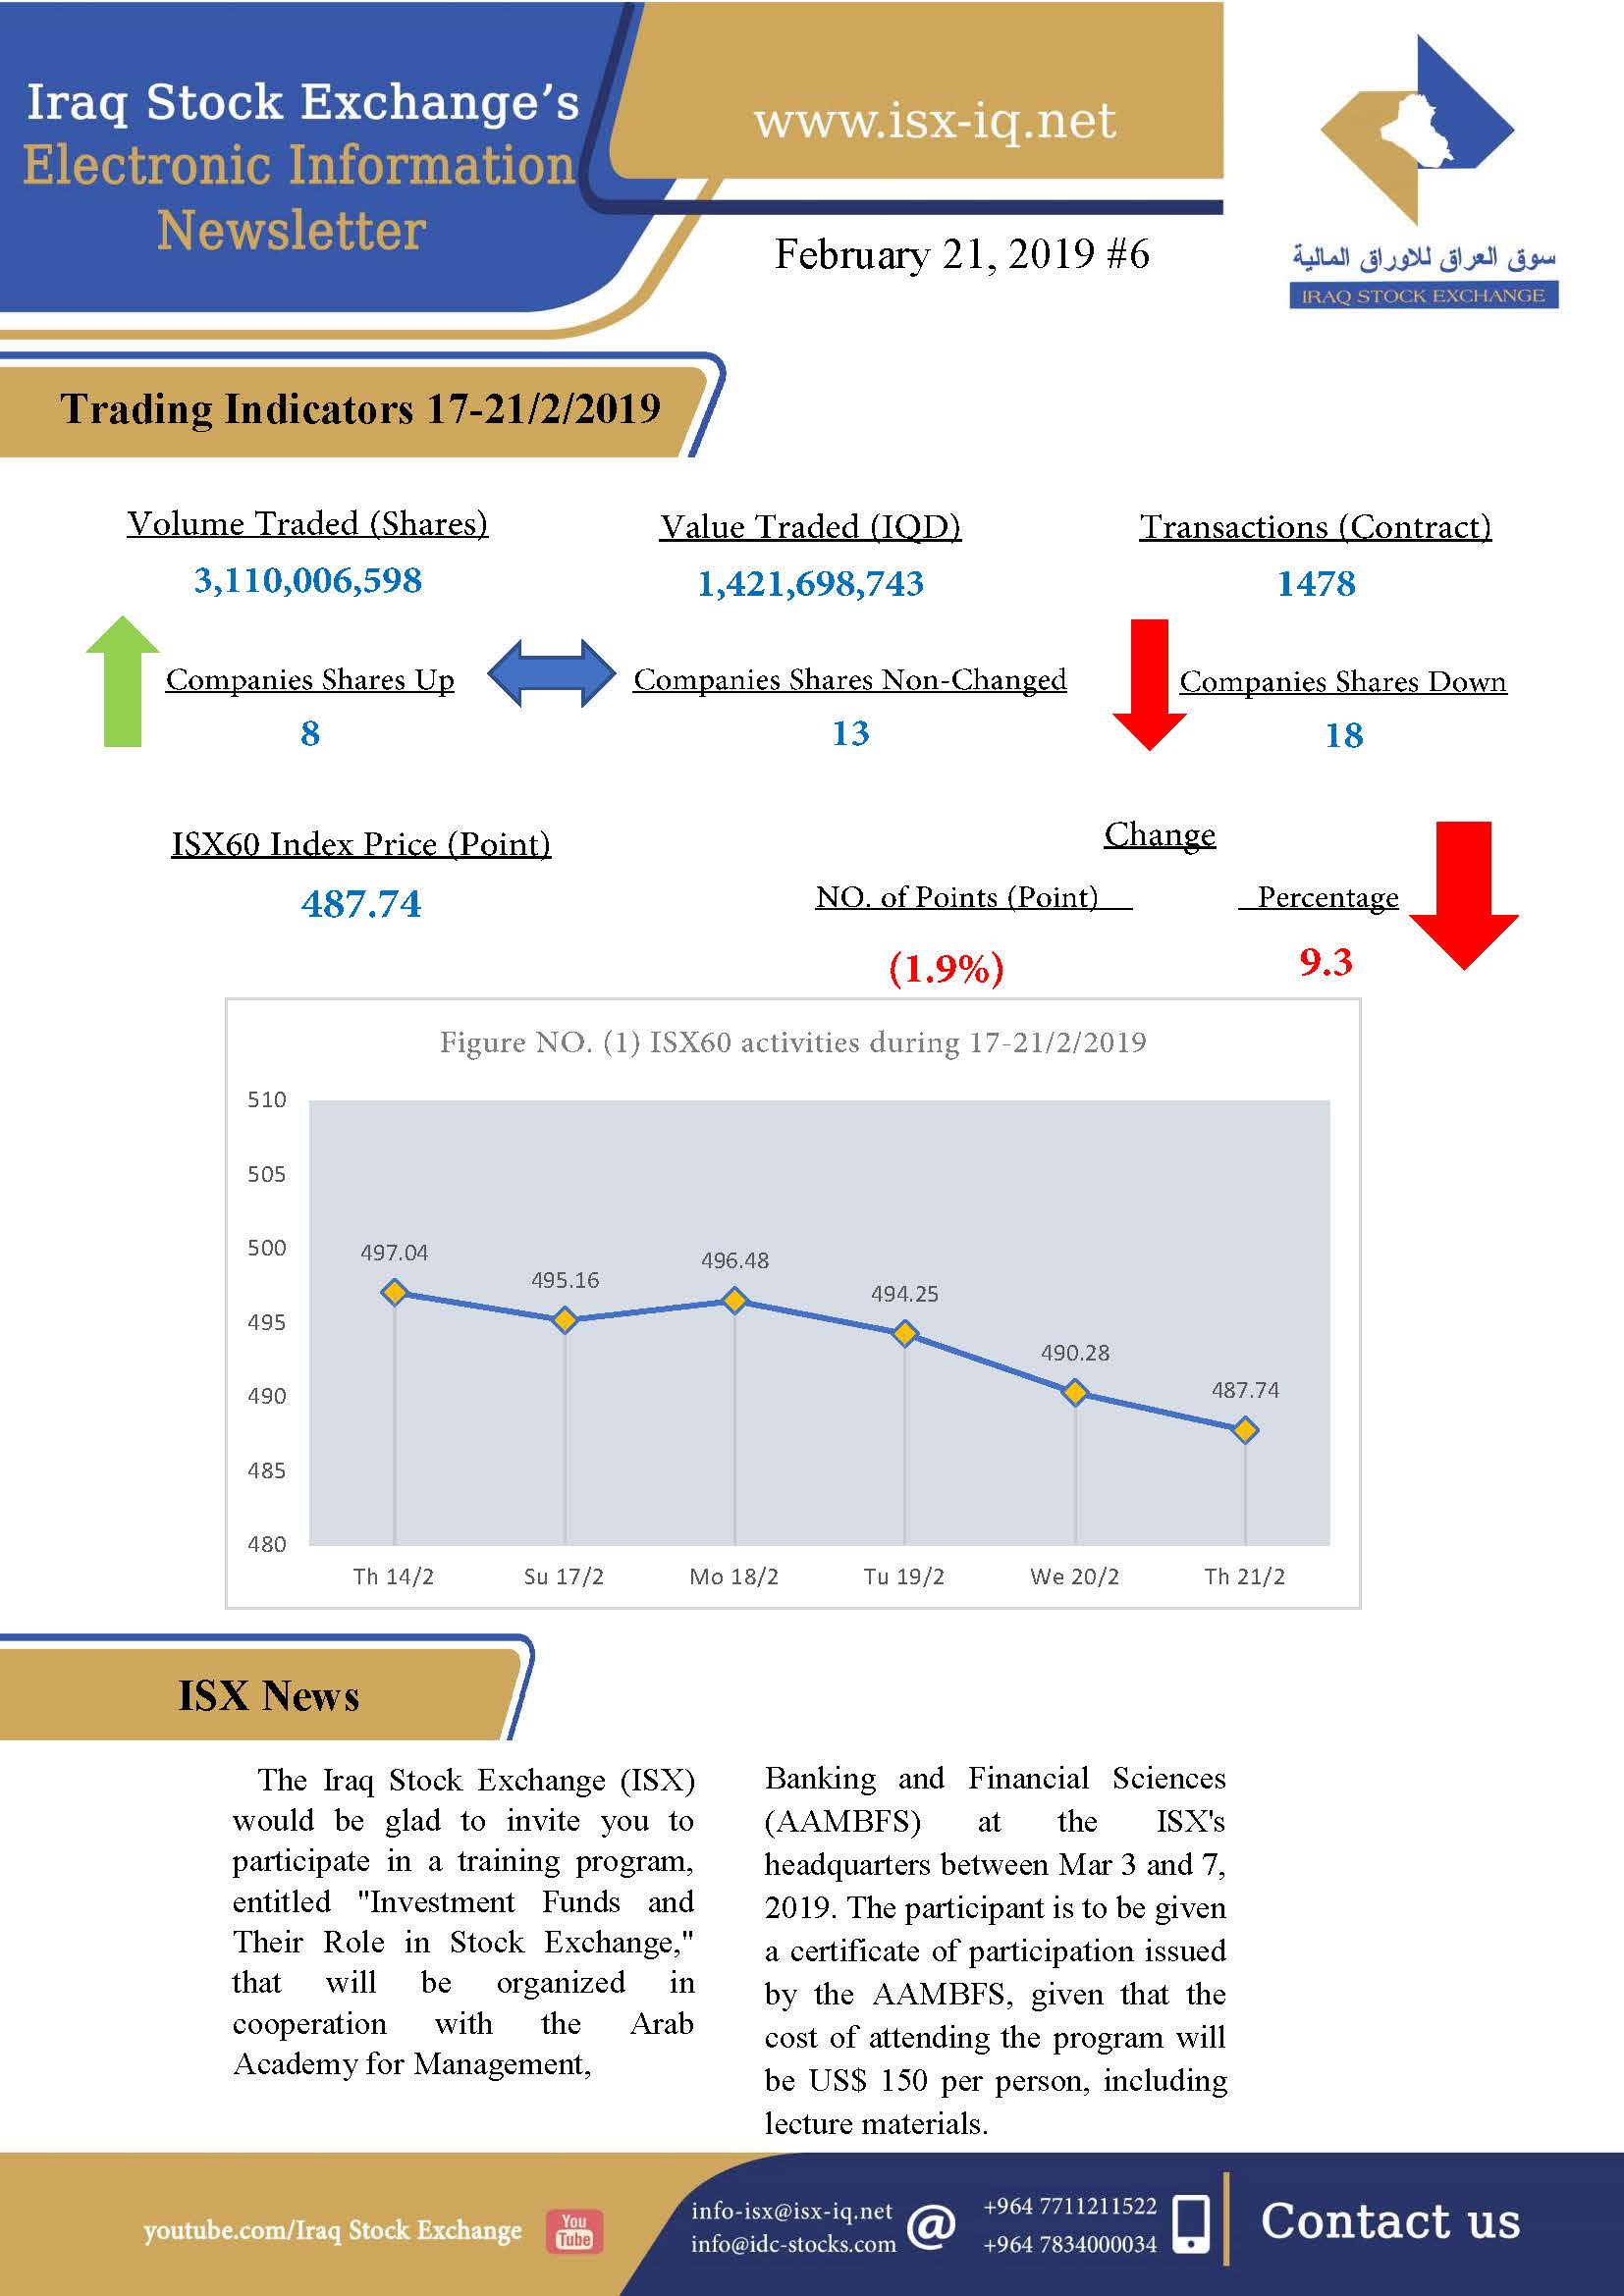 You are currently viewing Issue number 6 of (Iraq Stock Exchange’s Electronic Information weekly Newsletter)